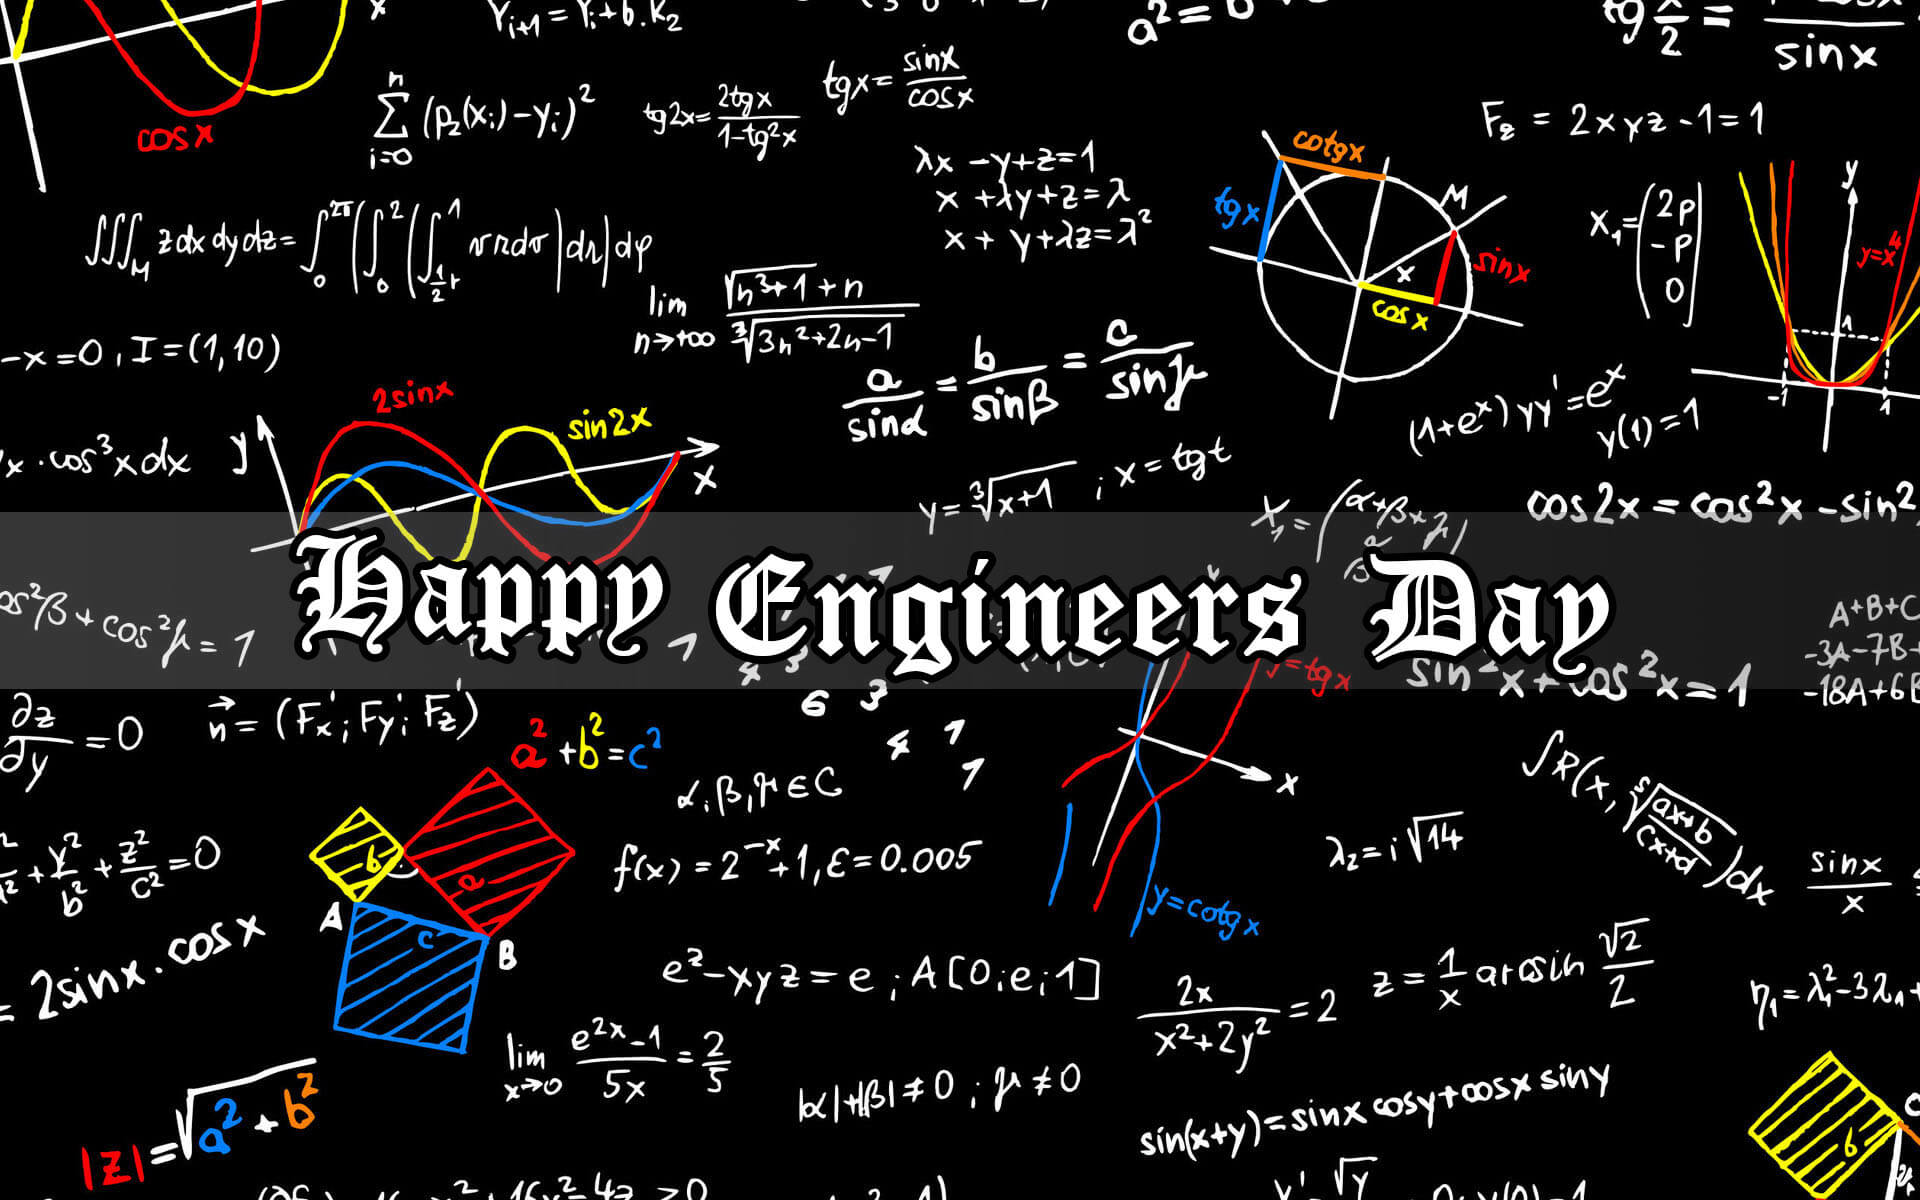 Happy Engineer's Day 2020: Cards, Greetings, Images and Quotes